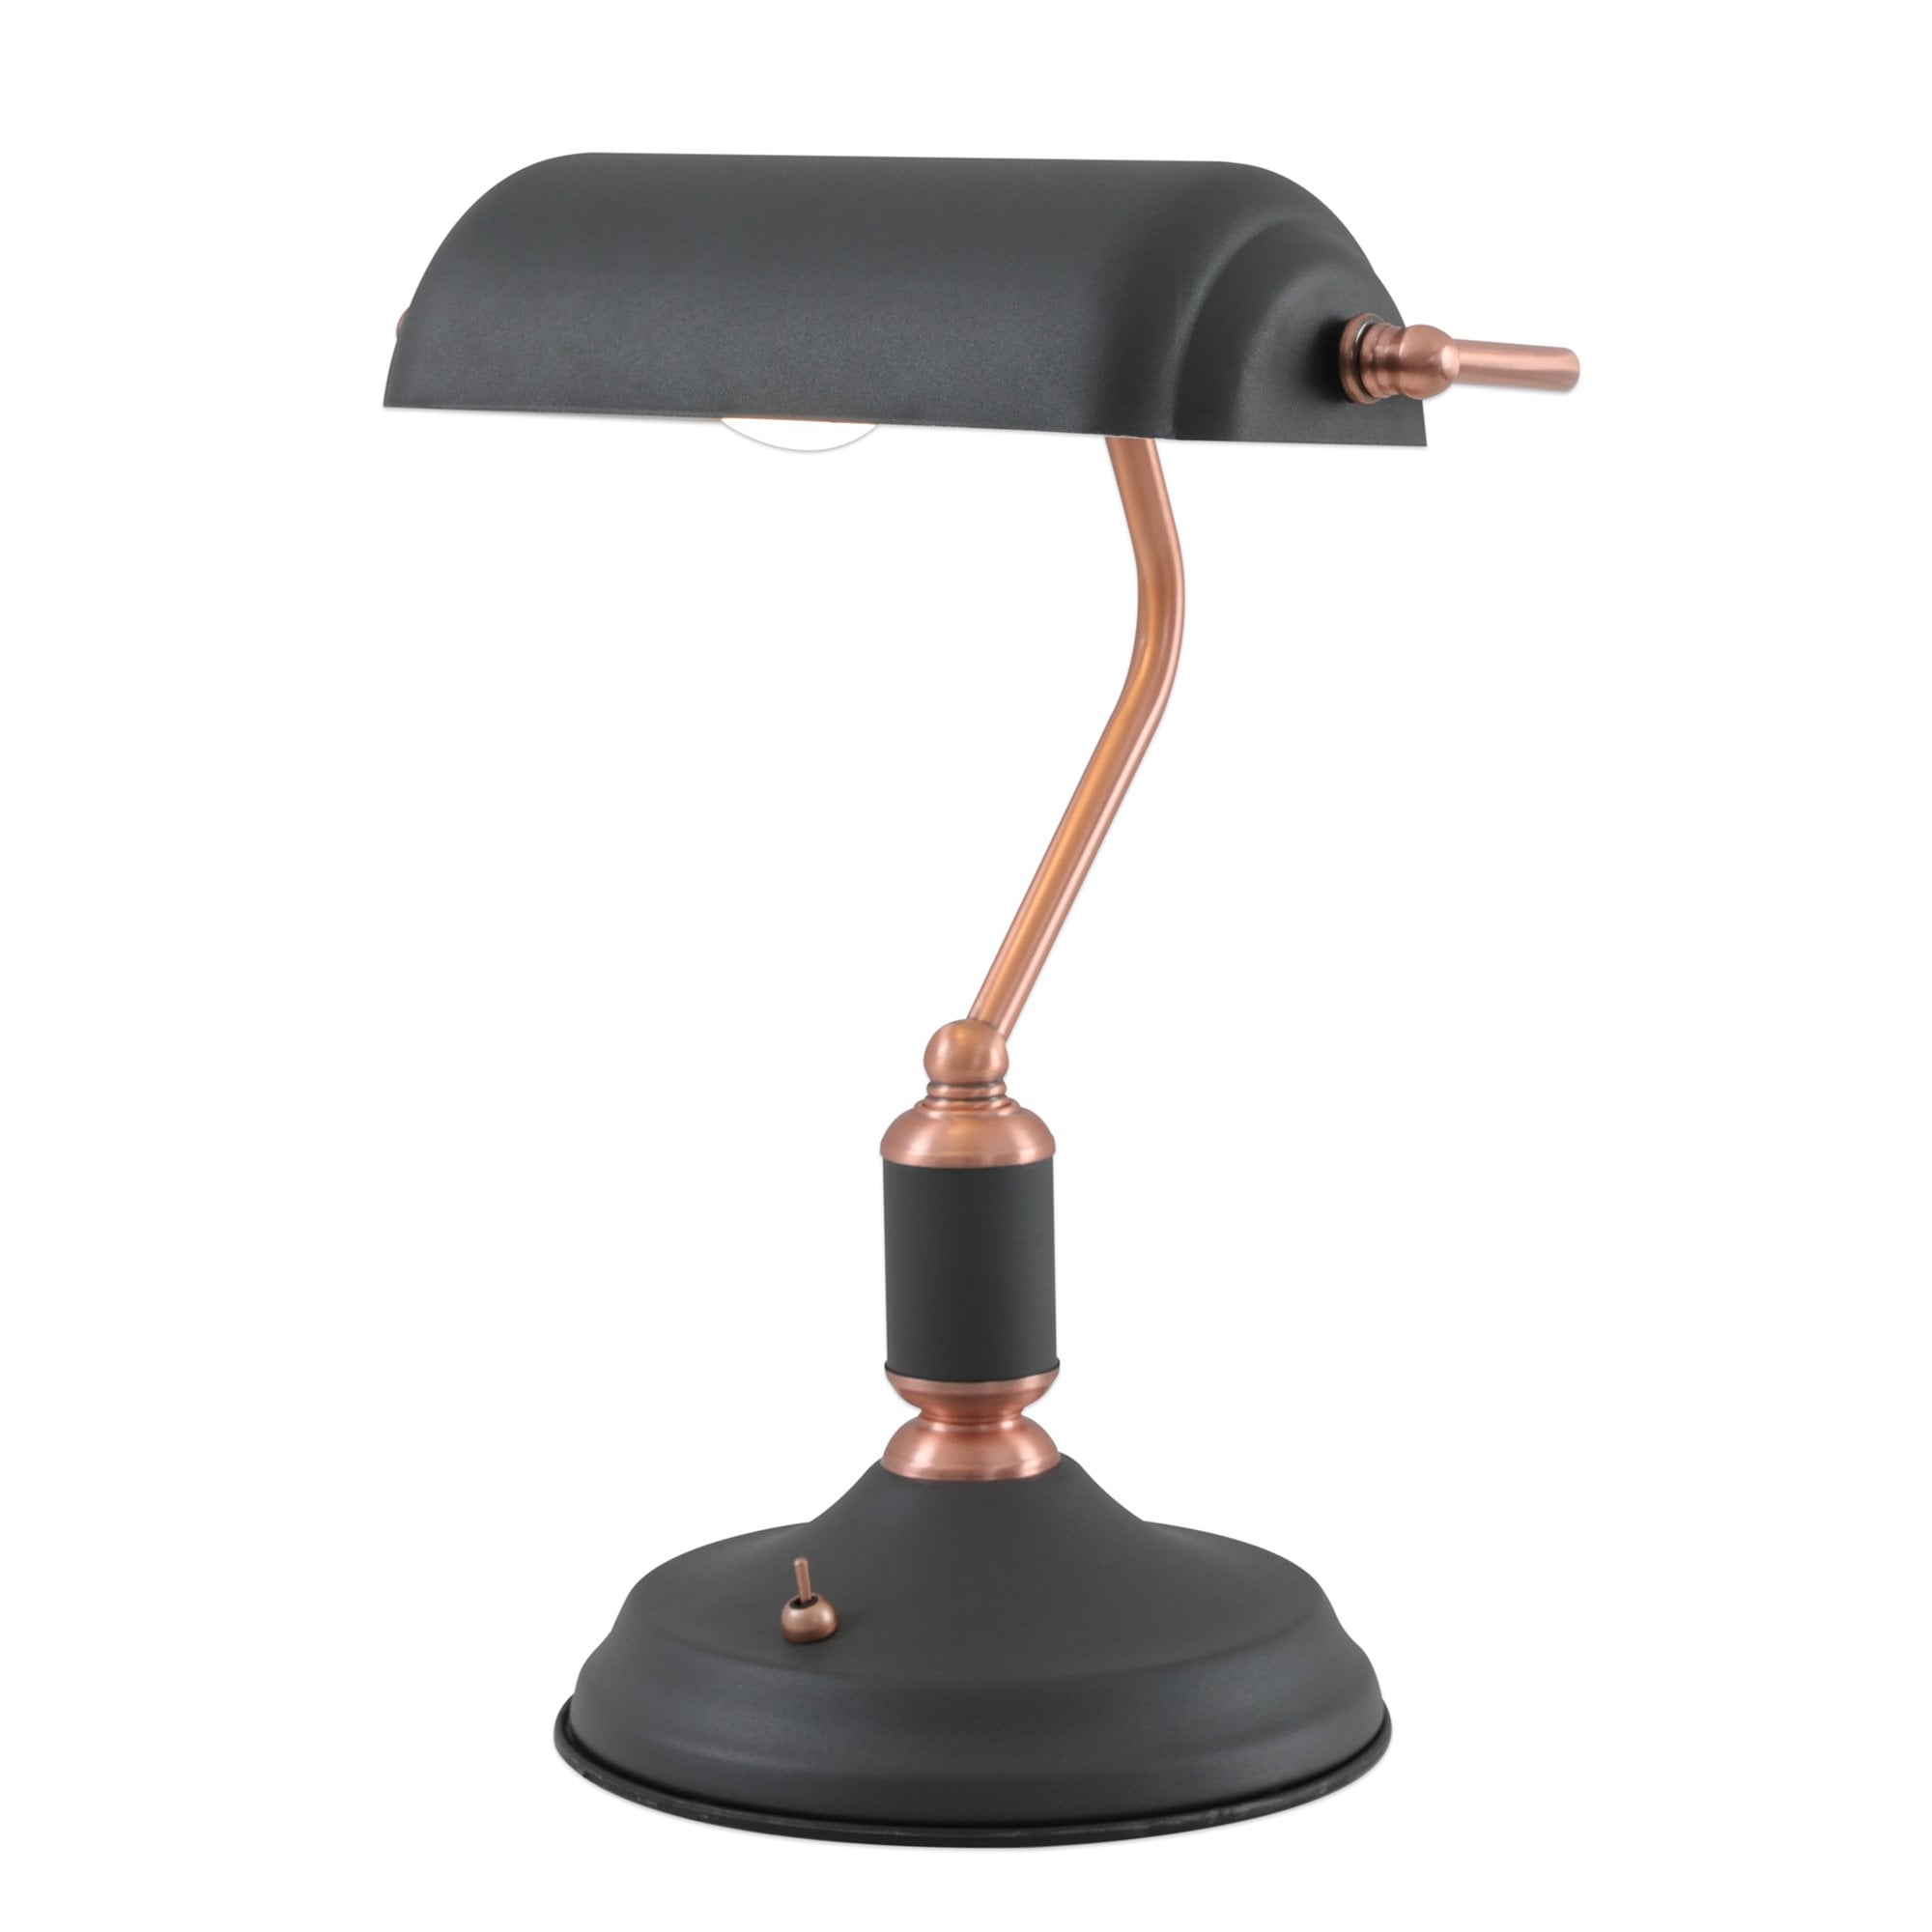 Table Lamp 1 Light With Toggle Switch, Sand Black/Copper